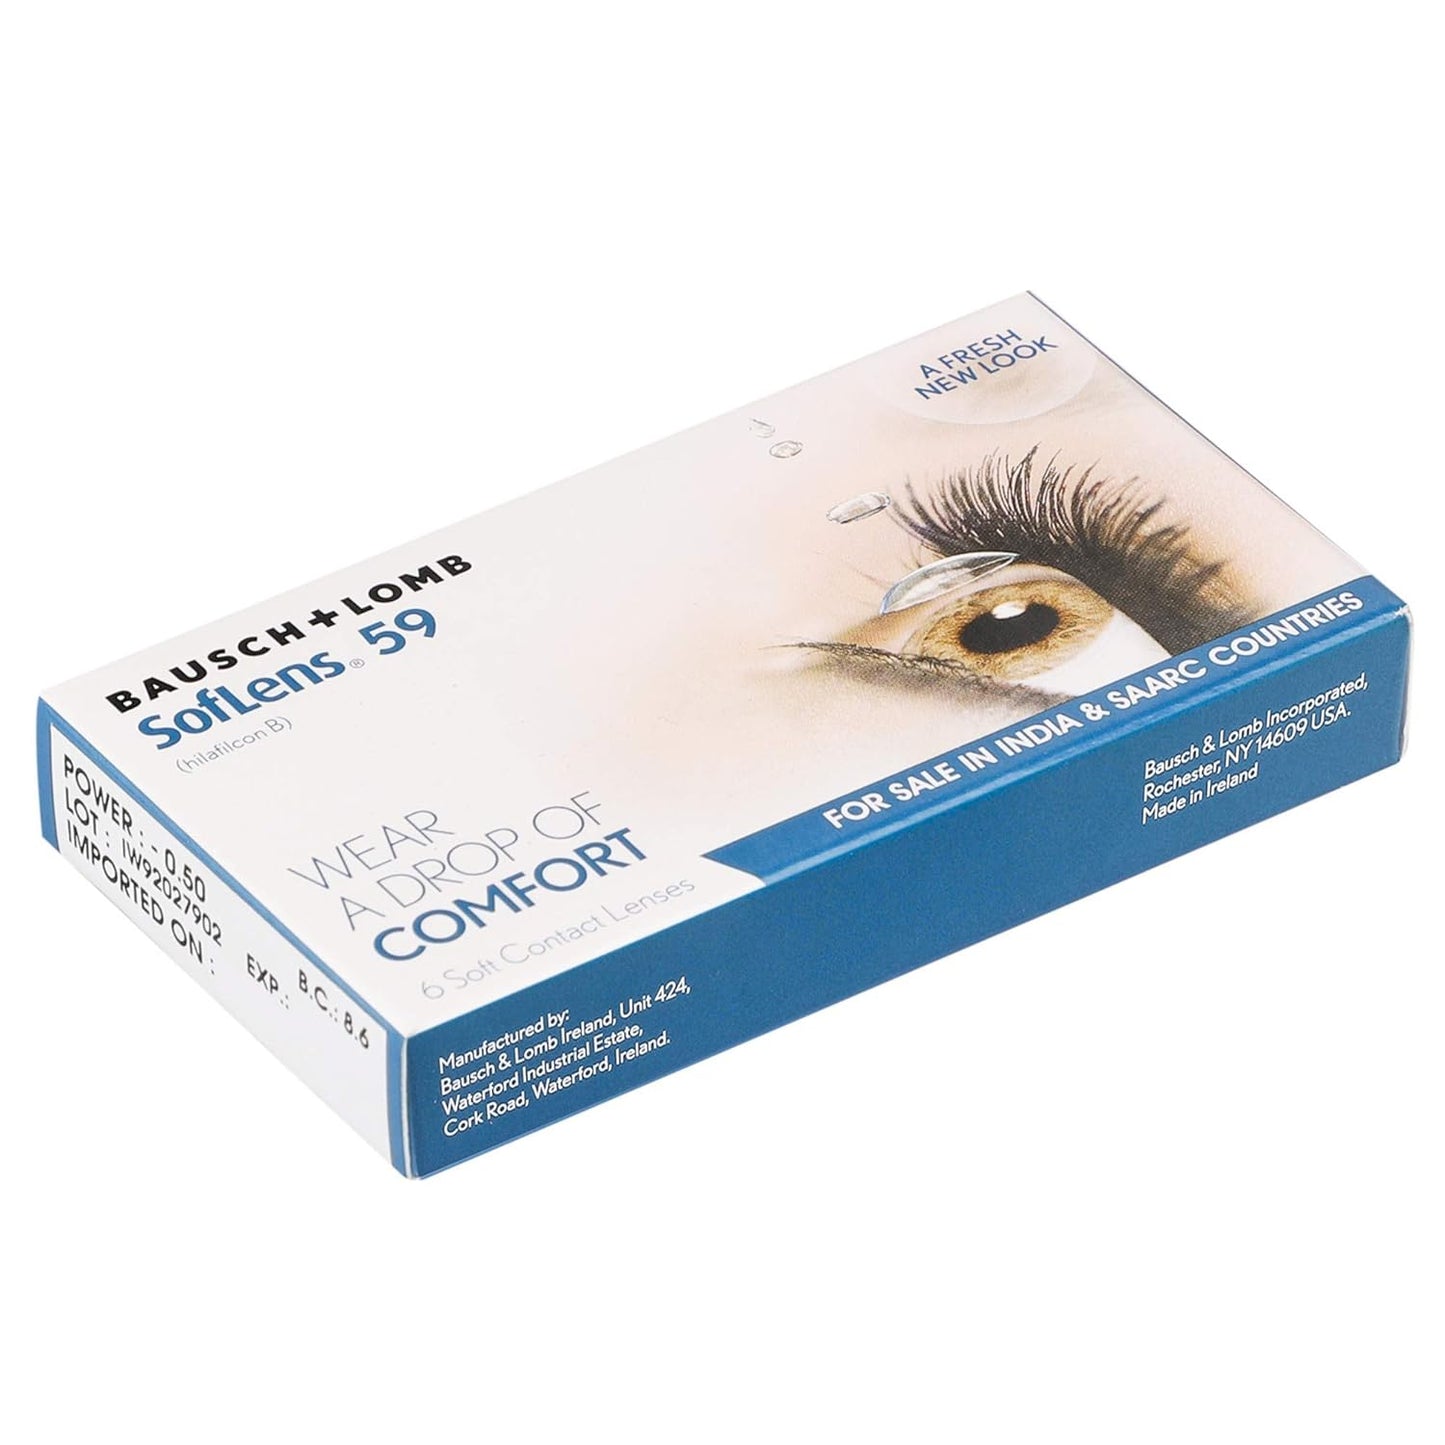 Bausch & Lomb Softlens 59 Monthly Disposable Contact Lens (Clear, 6 Lenses)